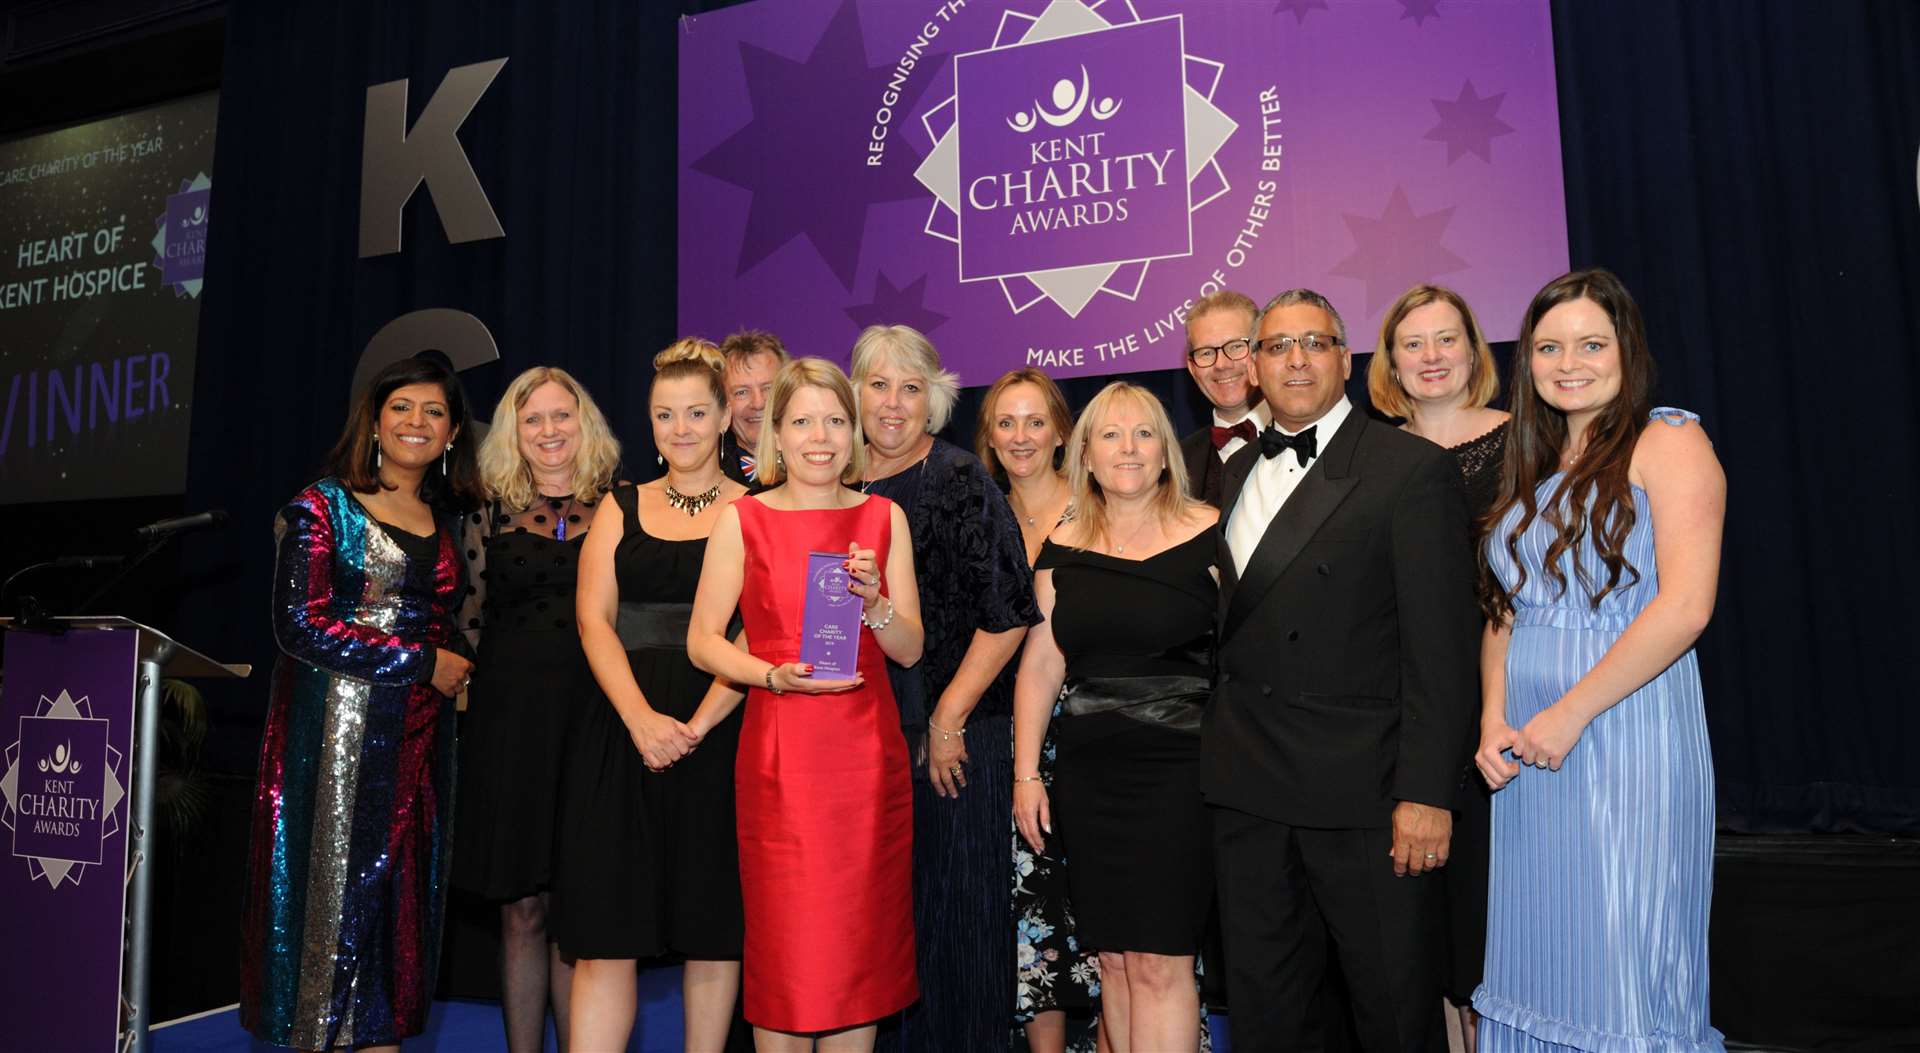 Heart of Kent Hospice volunteers and colleagues from the Kent Charity Awards in 2019